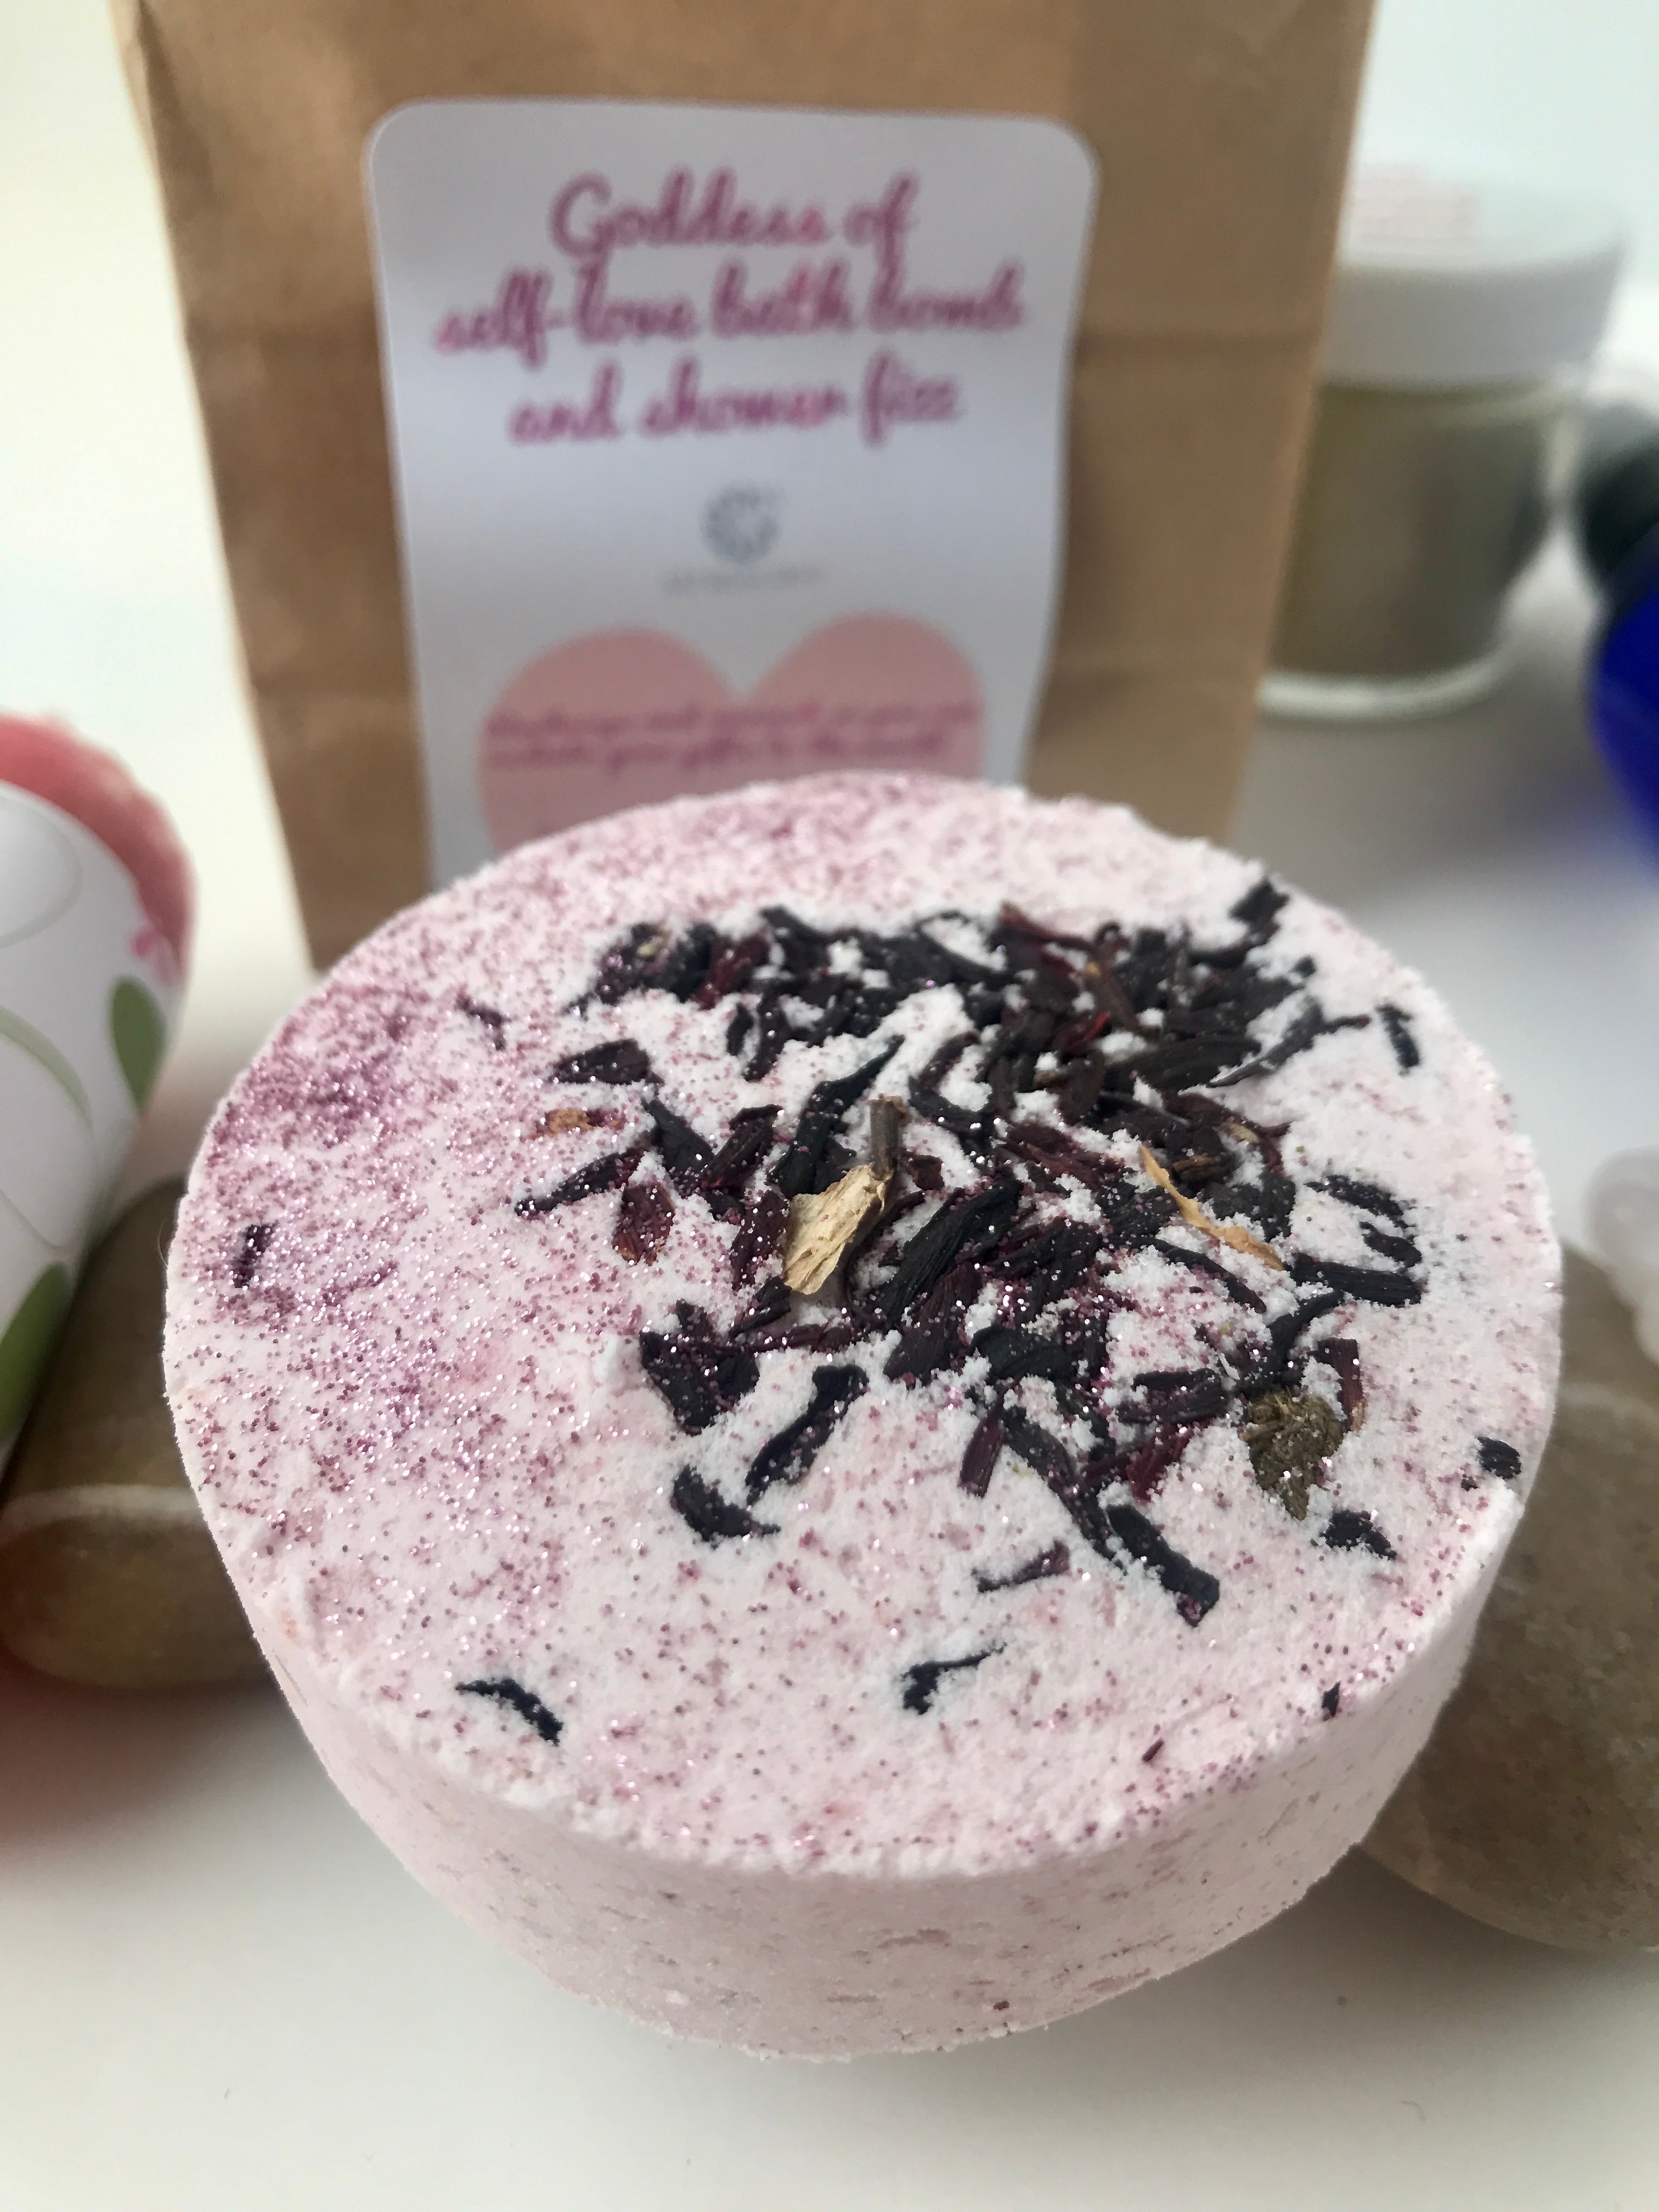 Goddess of Self-Love Bath Bomb with Ylang Ylang, Lavender and Bergamot Essential oils, all natural and cruelty free and sprinkled with eco-glitter and Hibiscus Flowers.